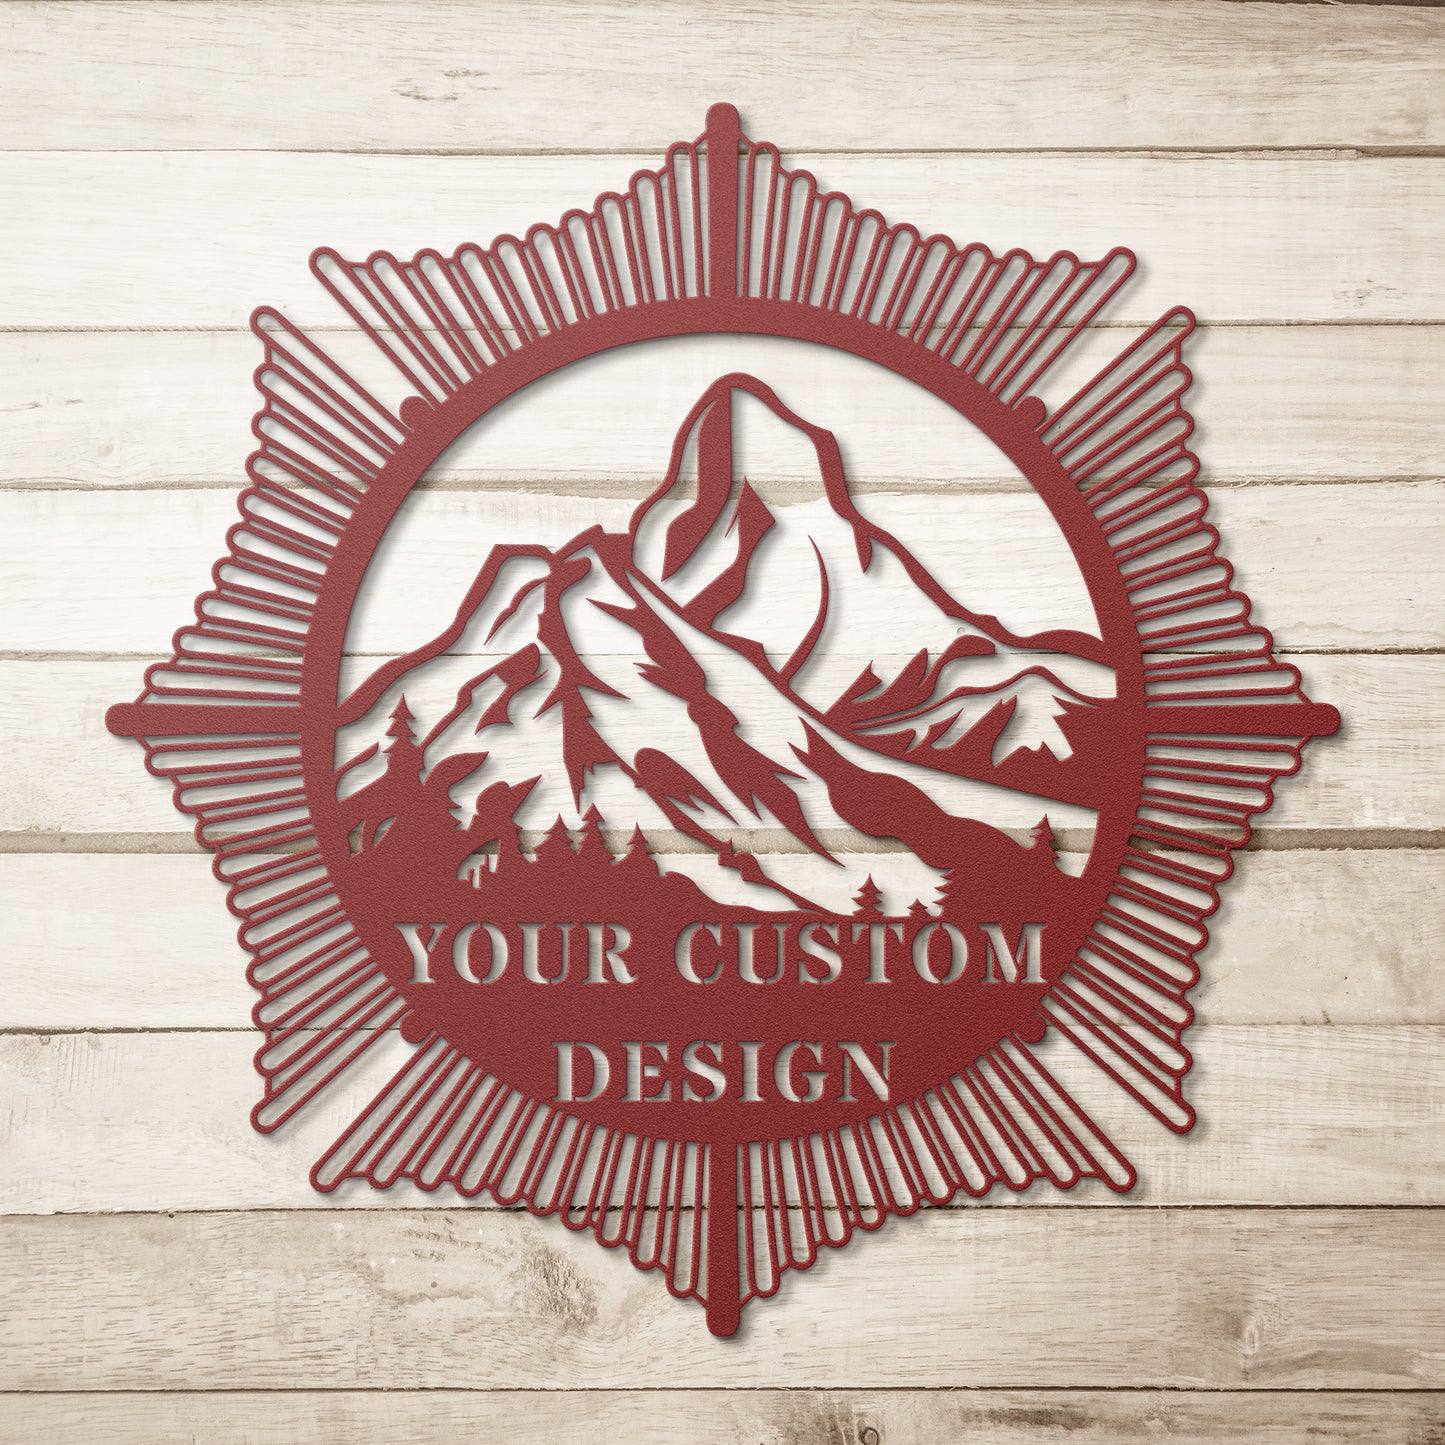 Personalize Your Own Metal Sign. Customize Your Own Wall Decoration